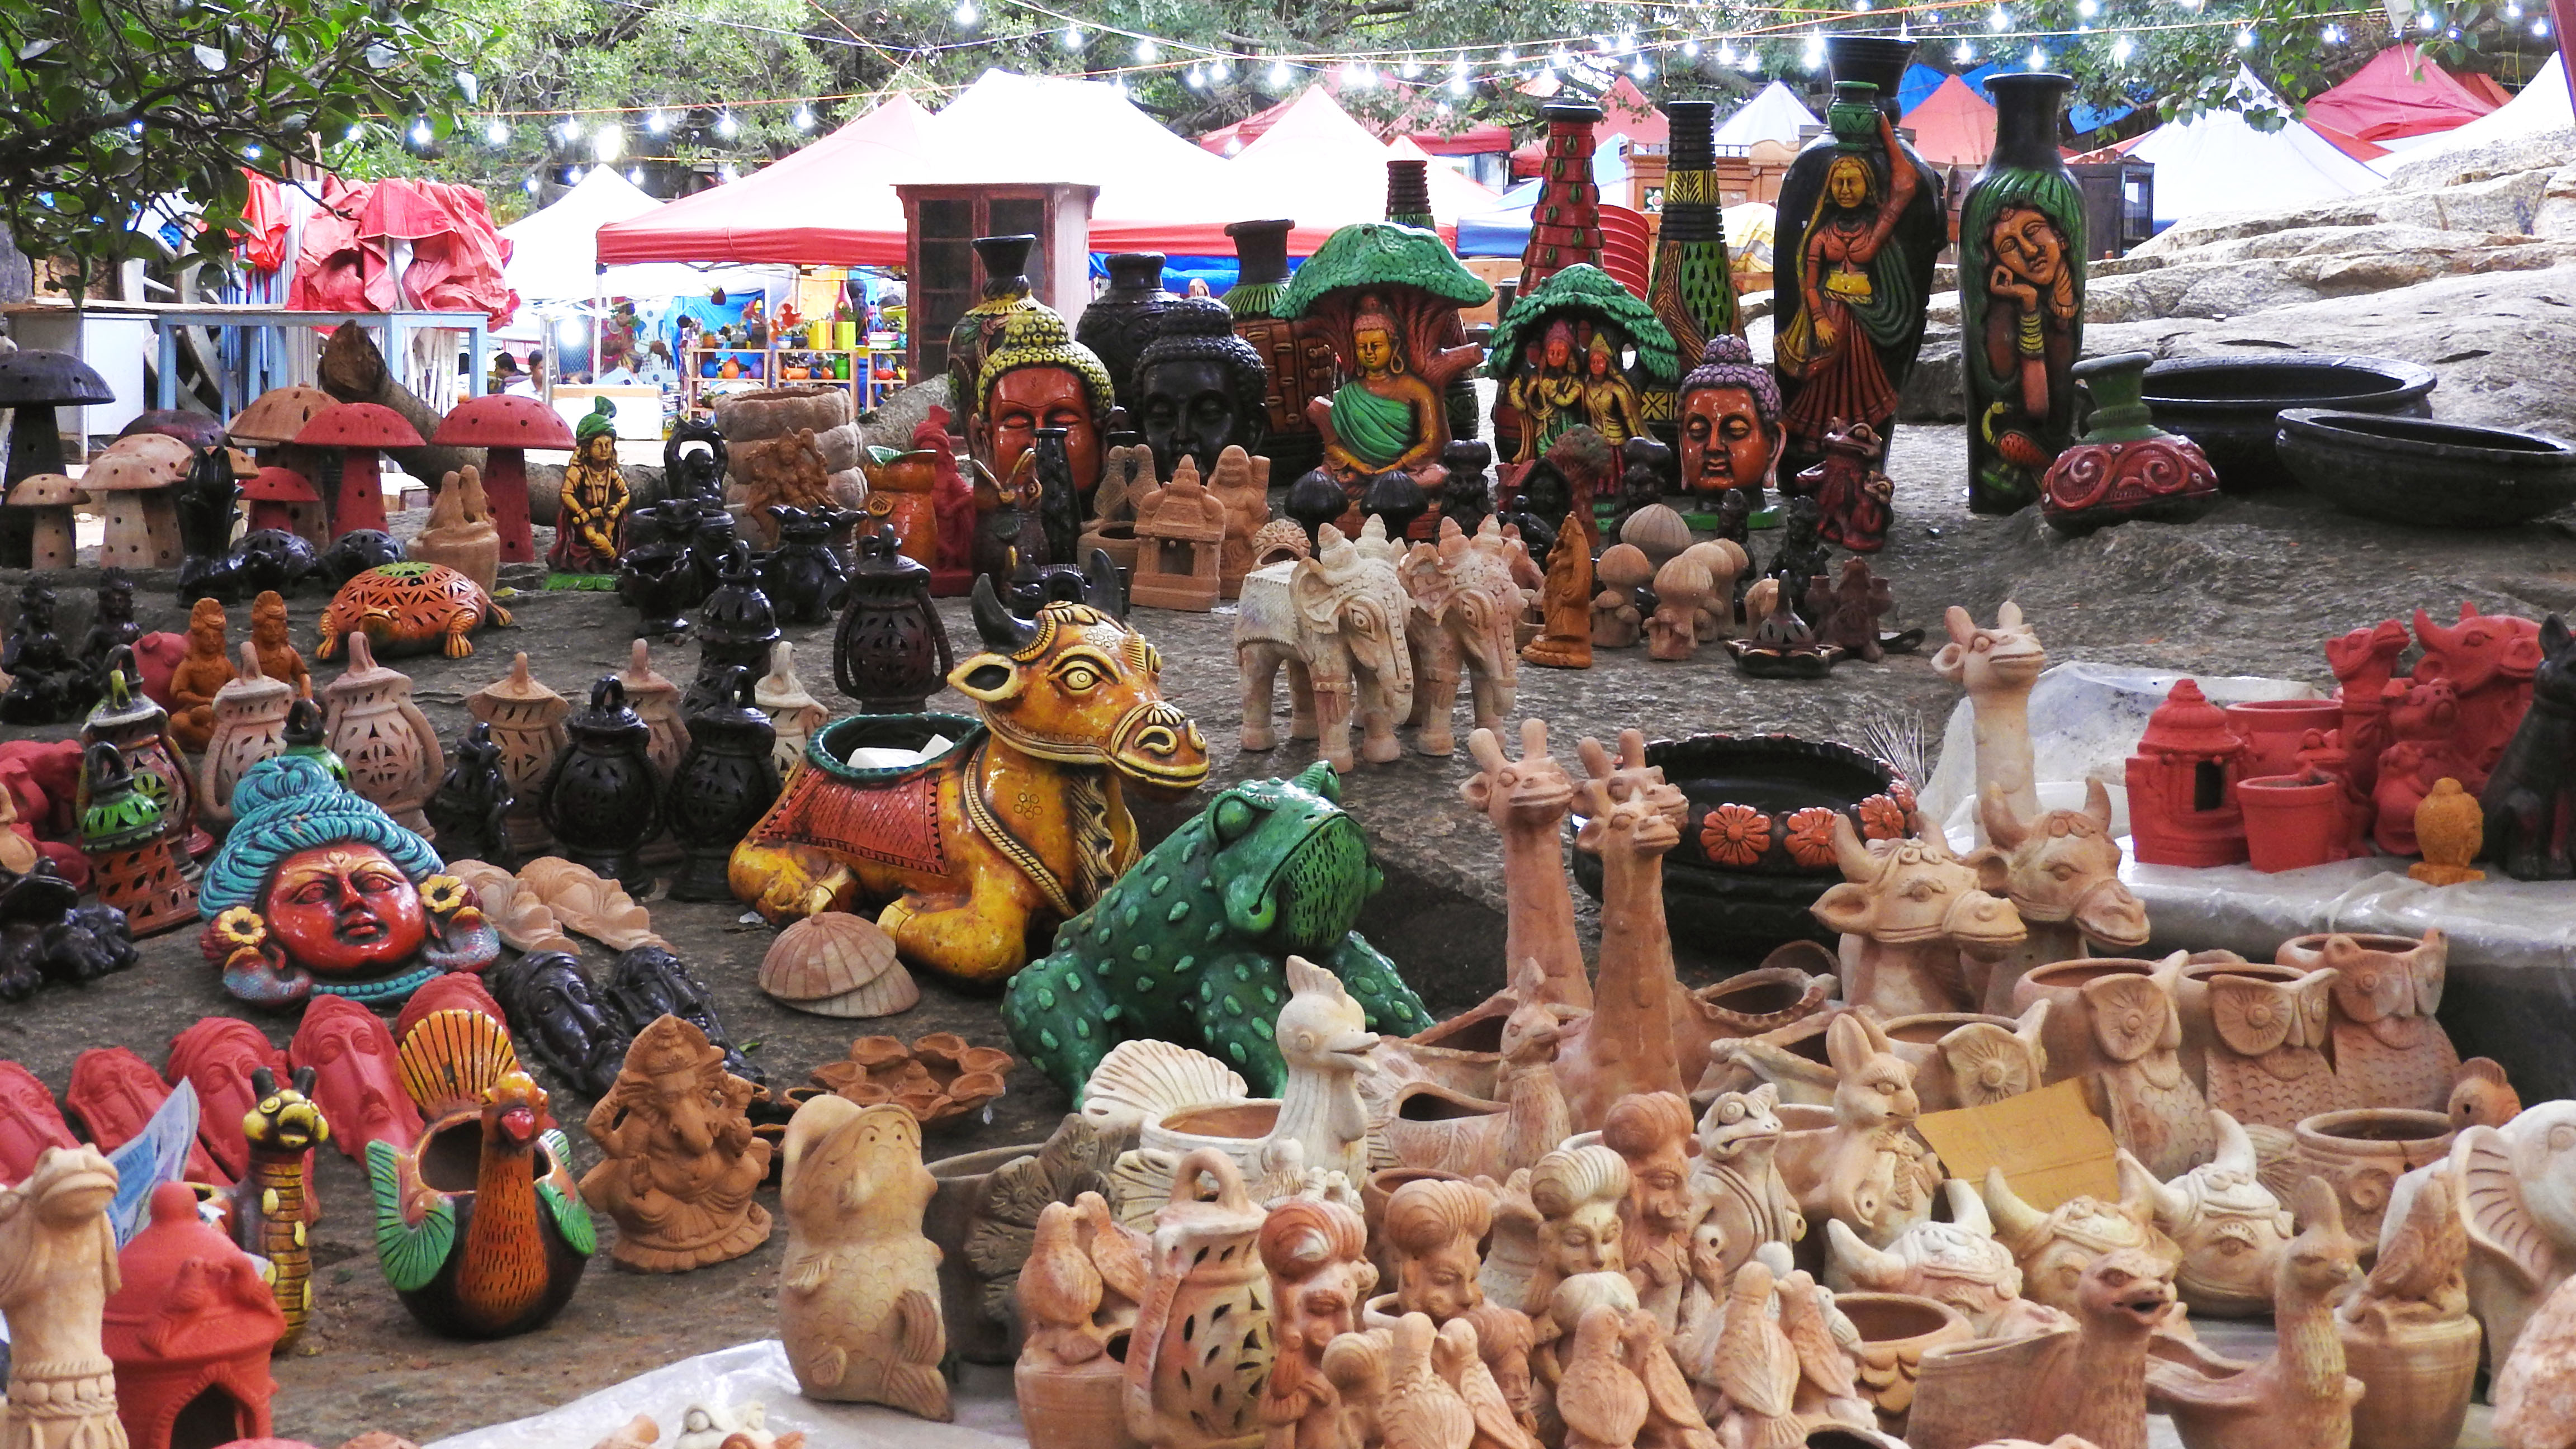 Karnataka Chitrakala Parishath also hosts a marketplace where artists and artisans can showcase and sell their work, providing a valuable platform for developing sustainable incomes. Photo by Elita Almeida